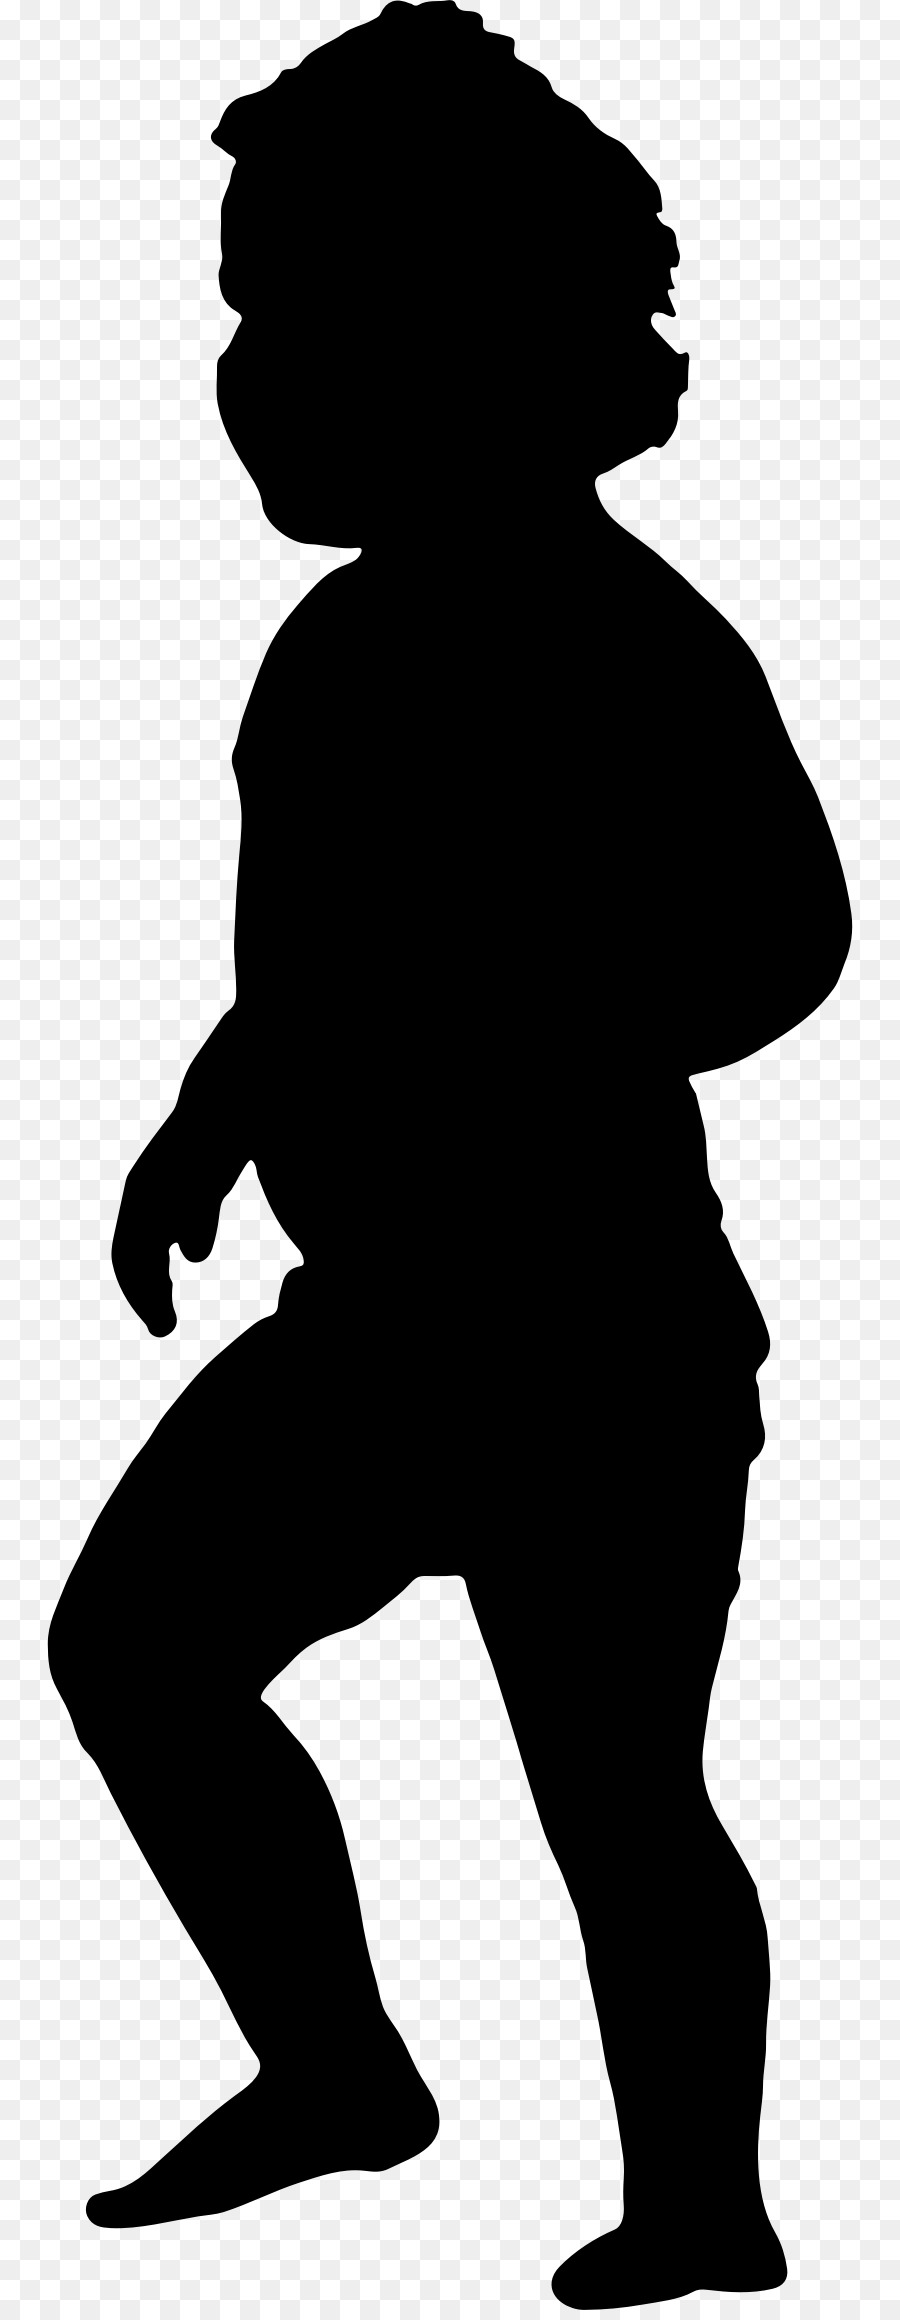 Infant Child Silhouette Diaper - sillhouette png download - 806*2310 - Free Transparent Infant png Download.